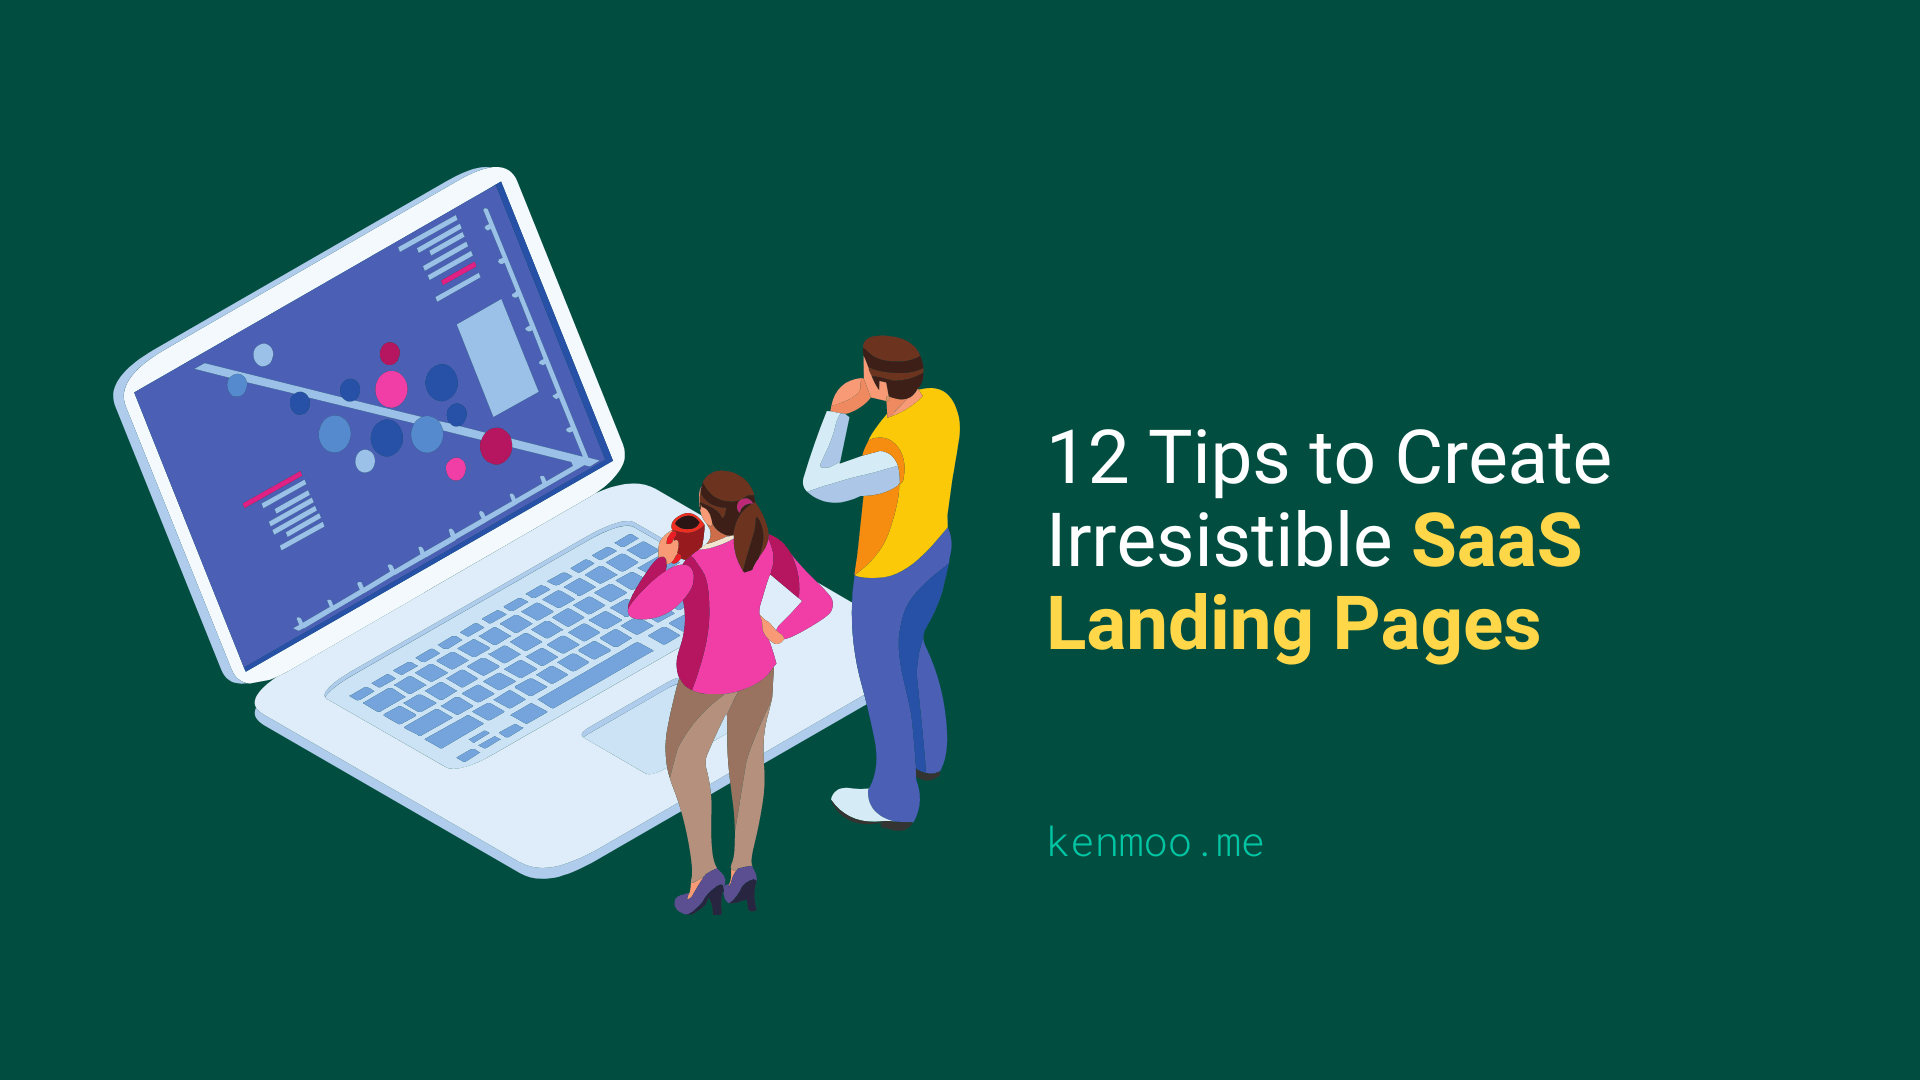 12 Tips to Create Irresistible SaaS Landing Pages